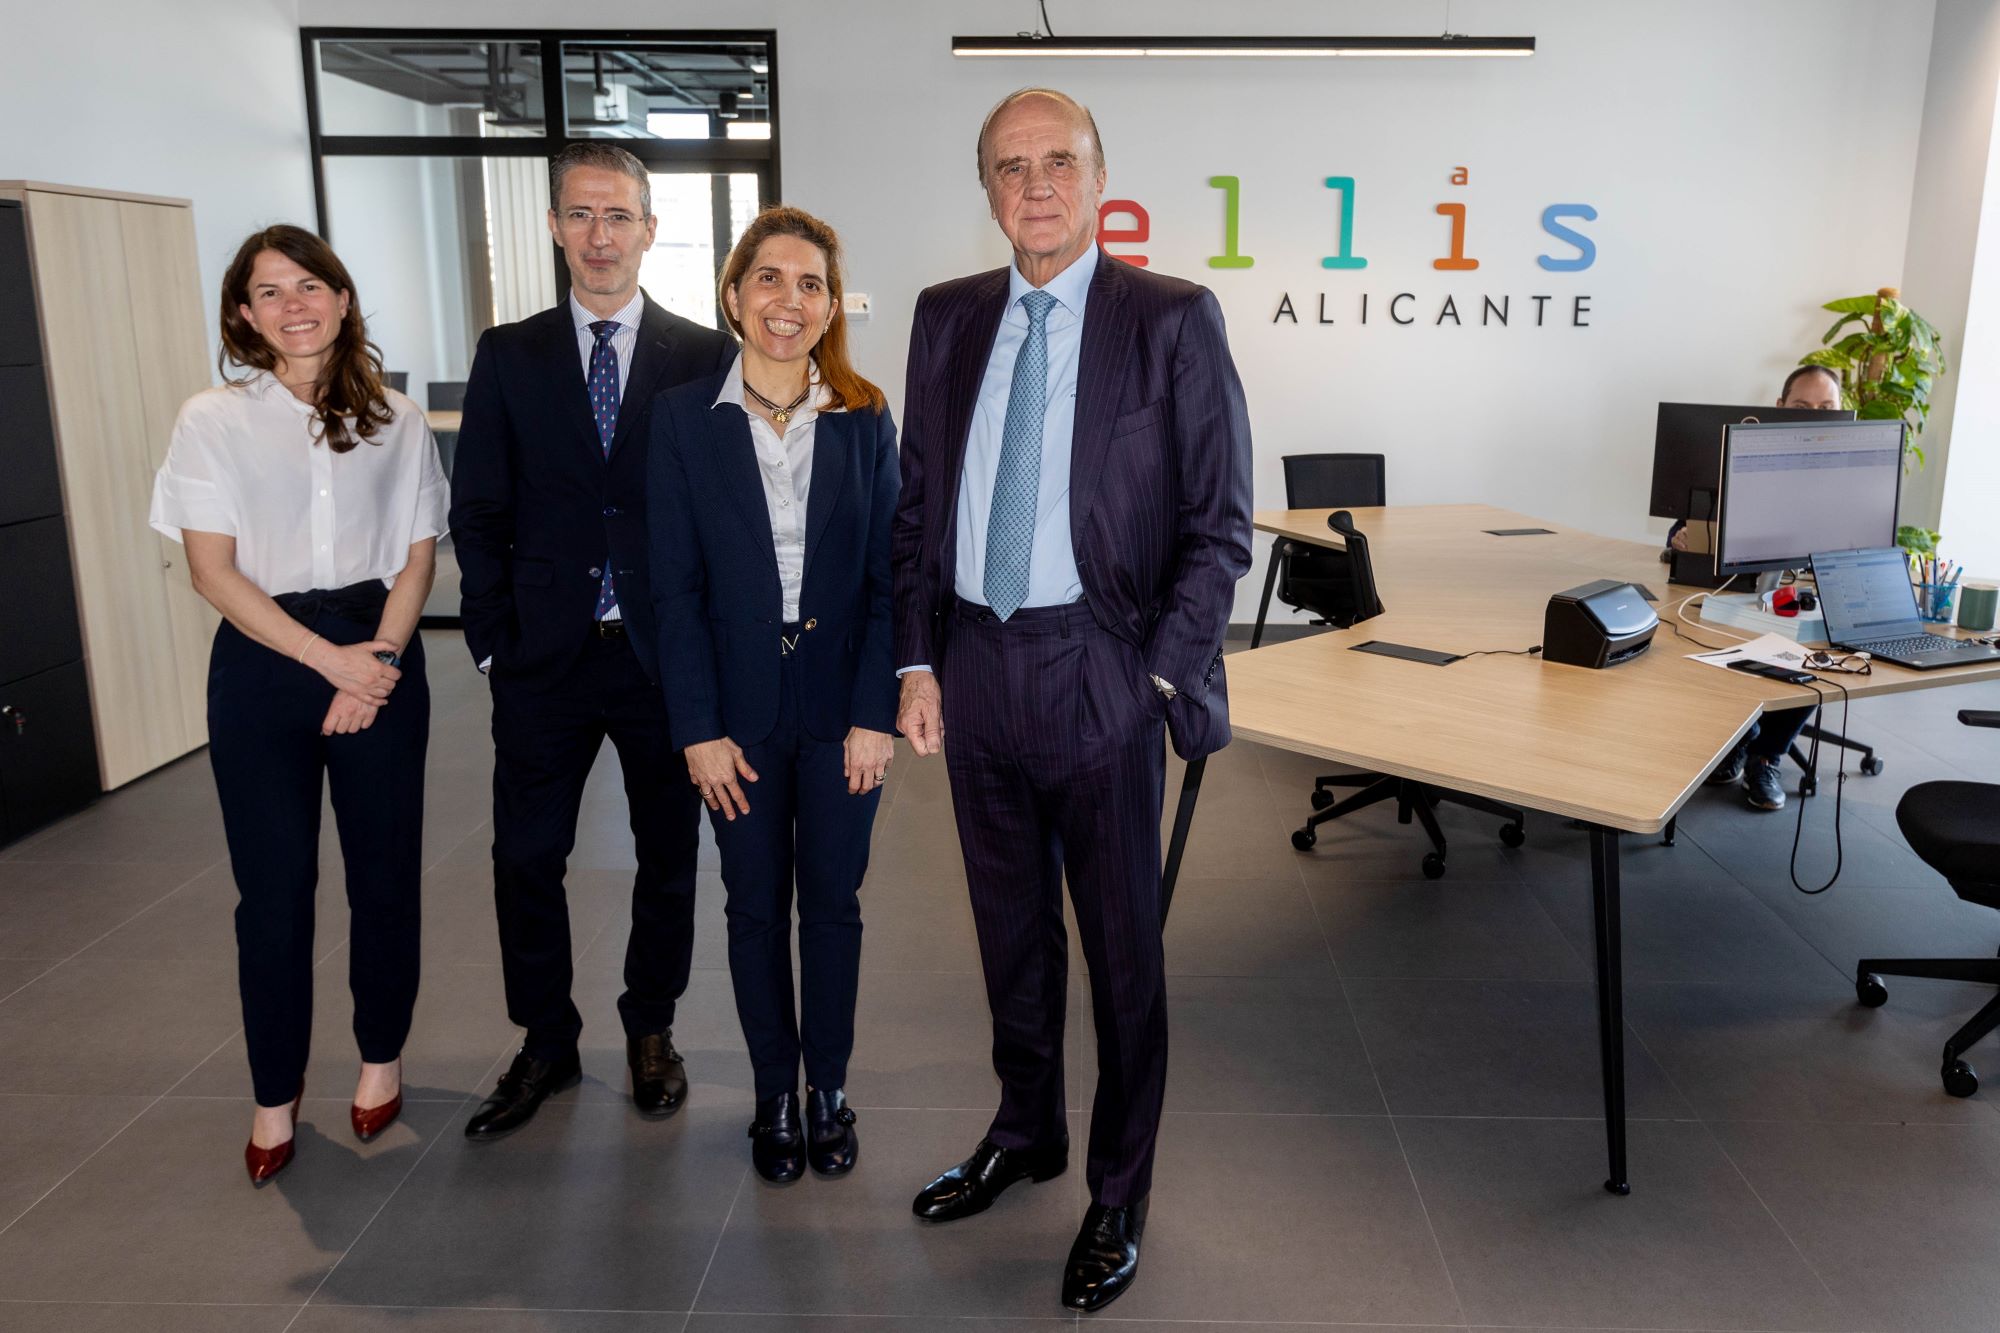 Nuria Oliver, director of ELLIS Alicante signs a collaboration agreement with Eduardo Gil, president of Nippon Gases.